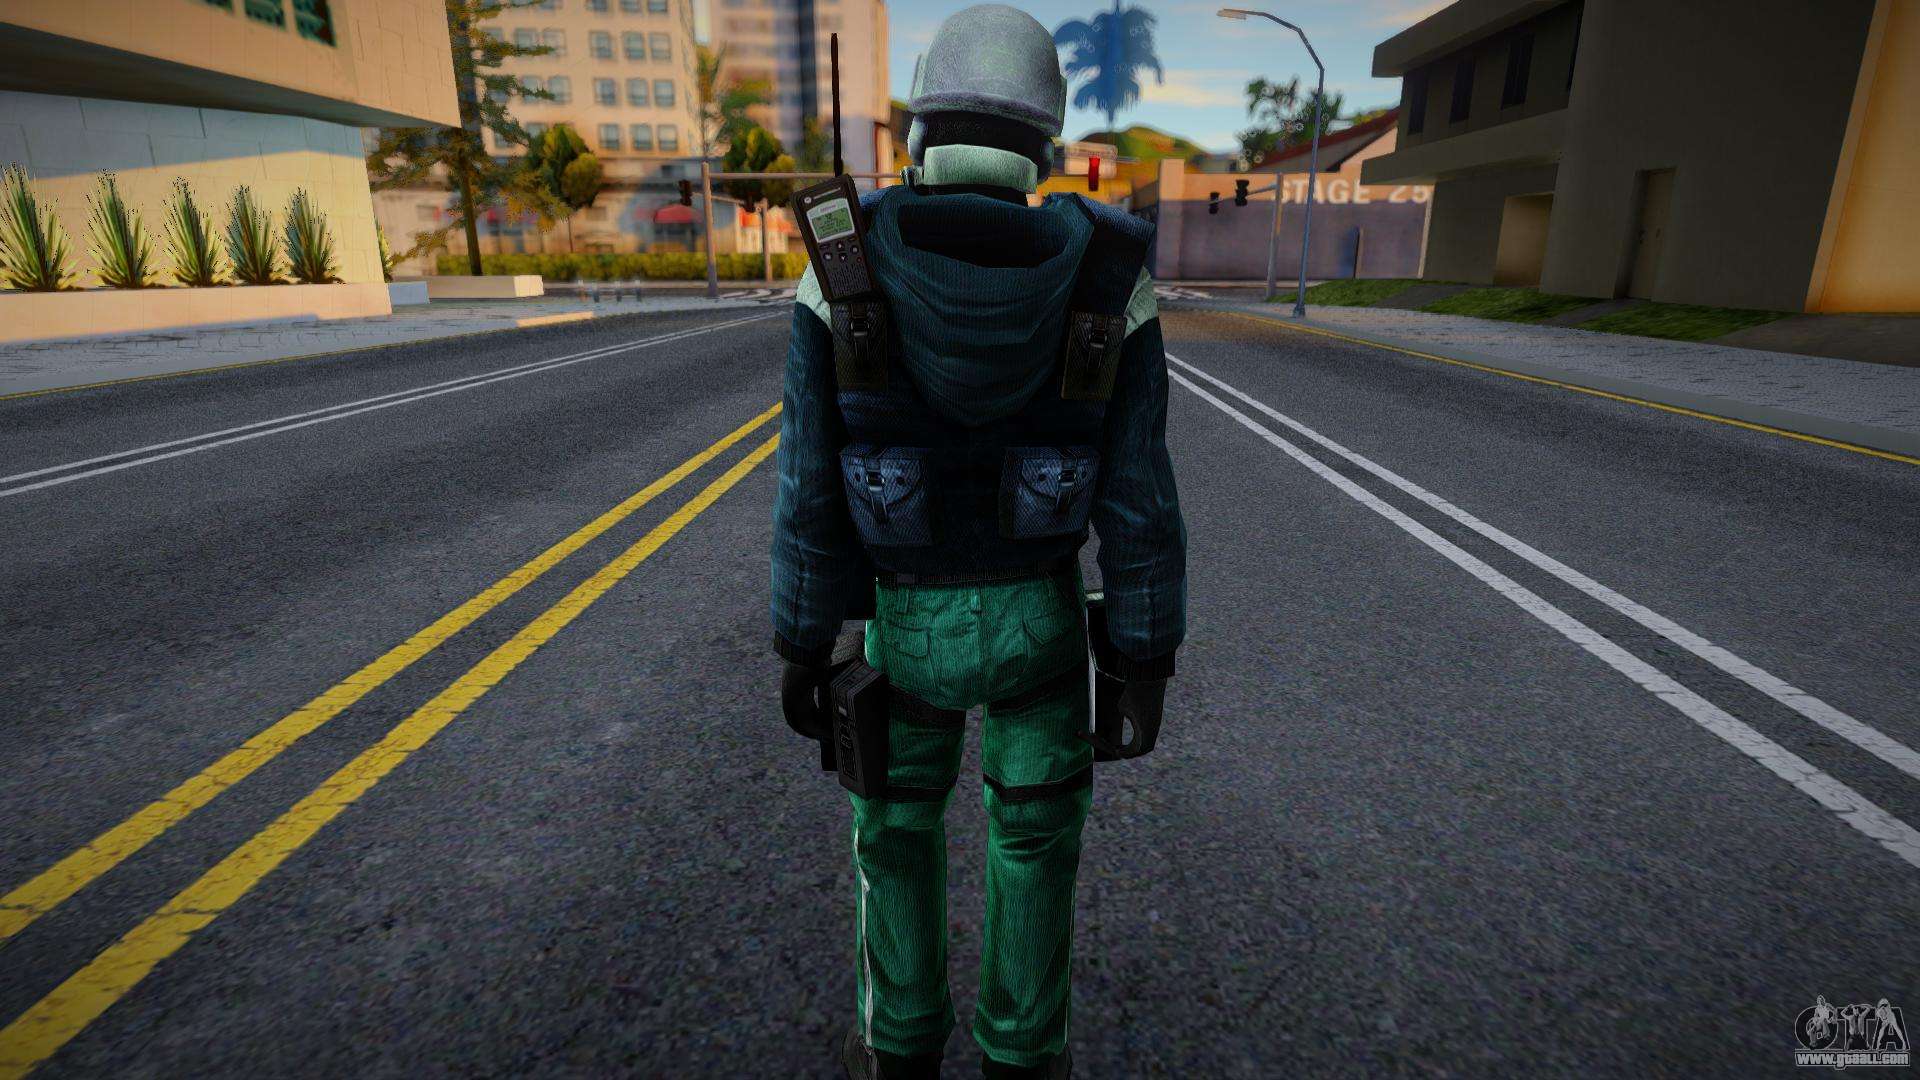 SAS (HL2 Metro Cop) from Counter-Strike Source for GTA San Andreas